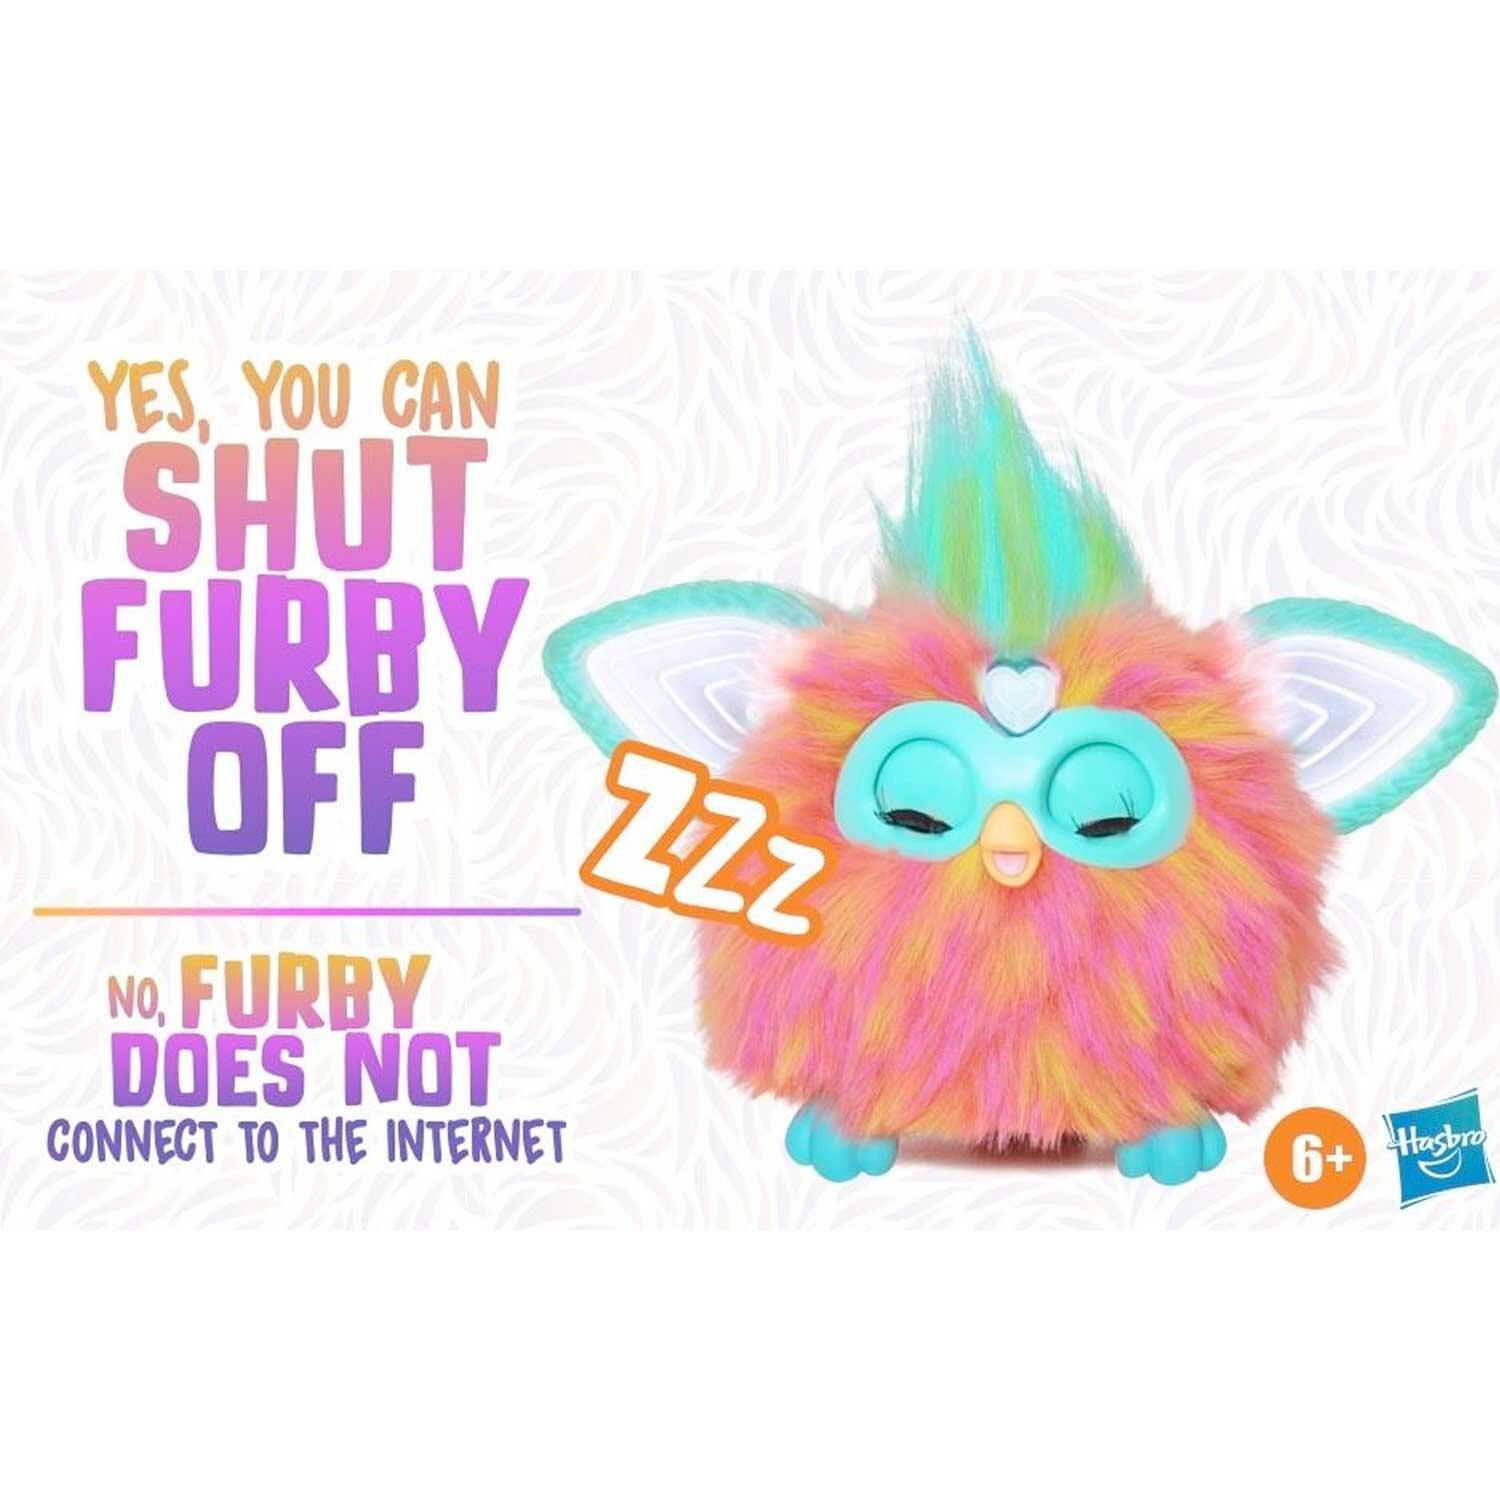 Hasbro Furby Coral Interactive Plush Toy Can Be Turned Off